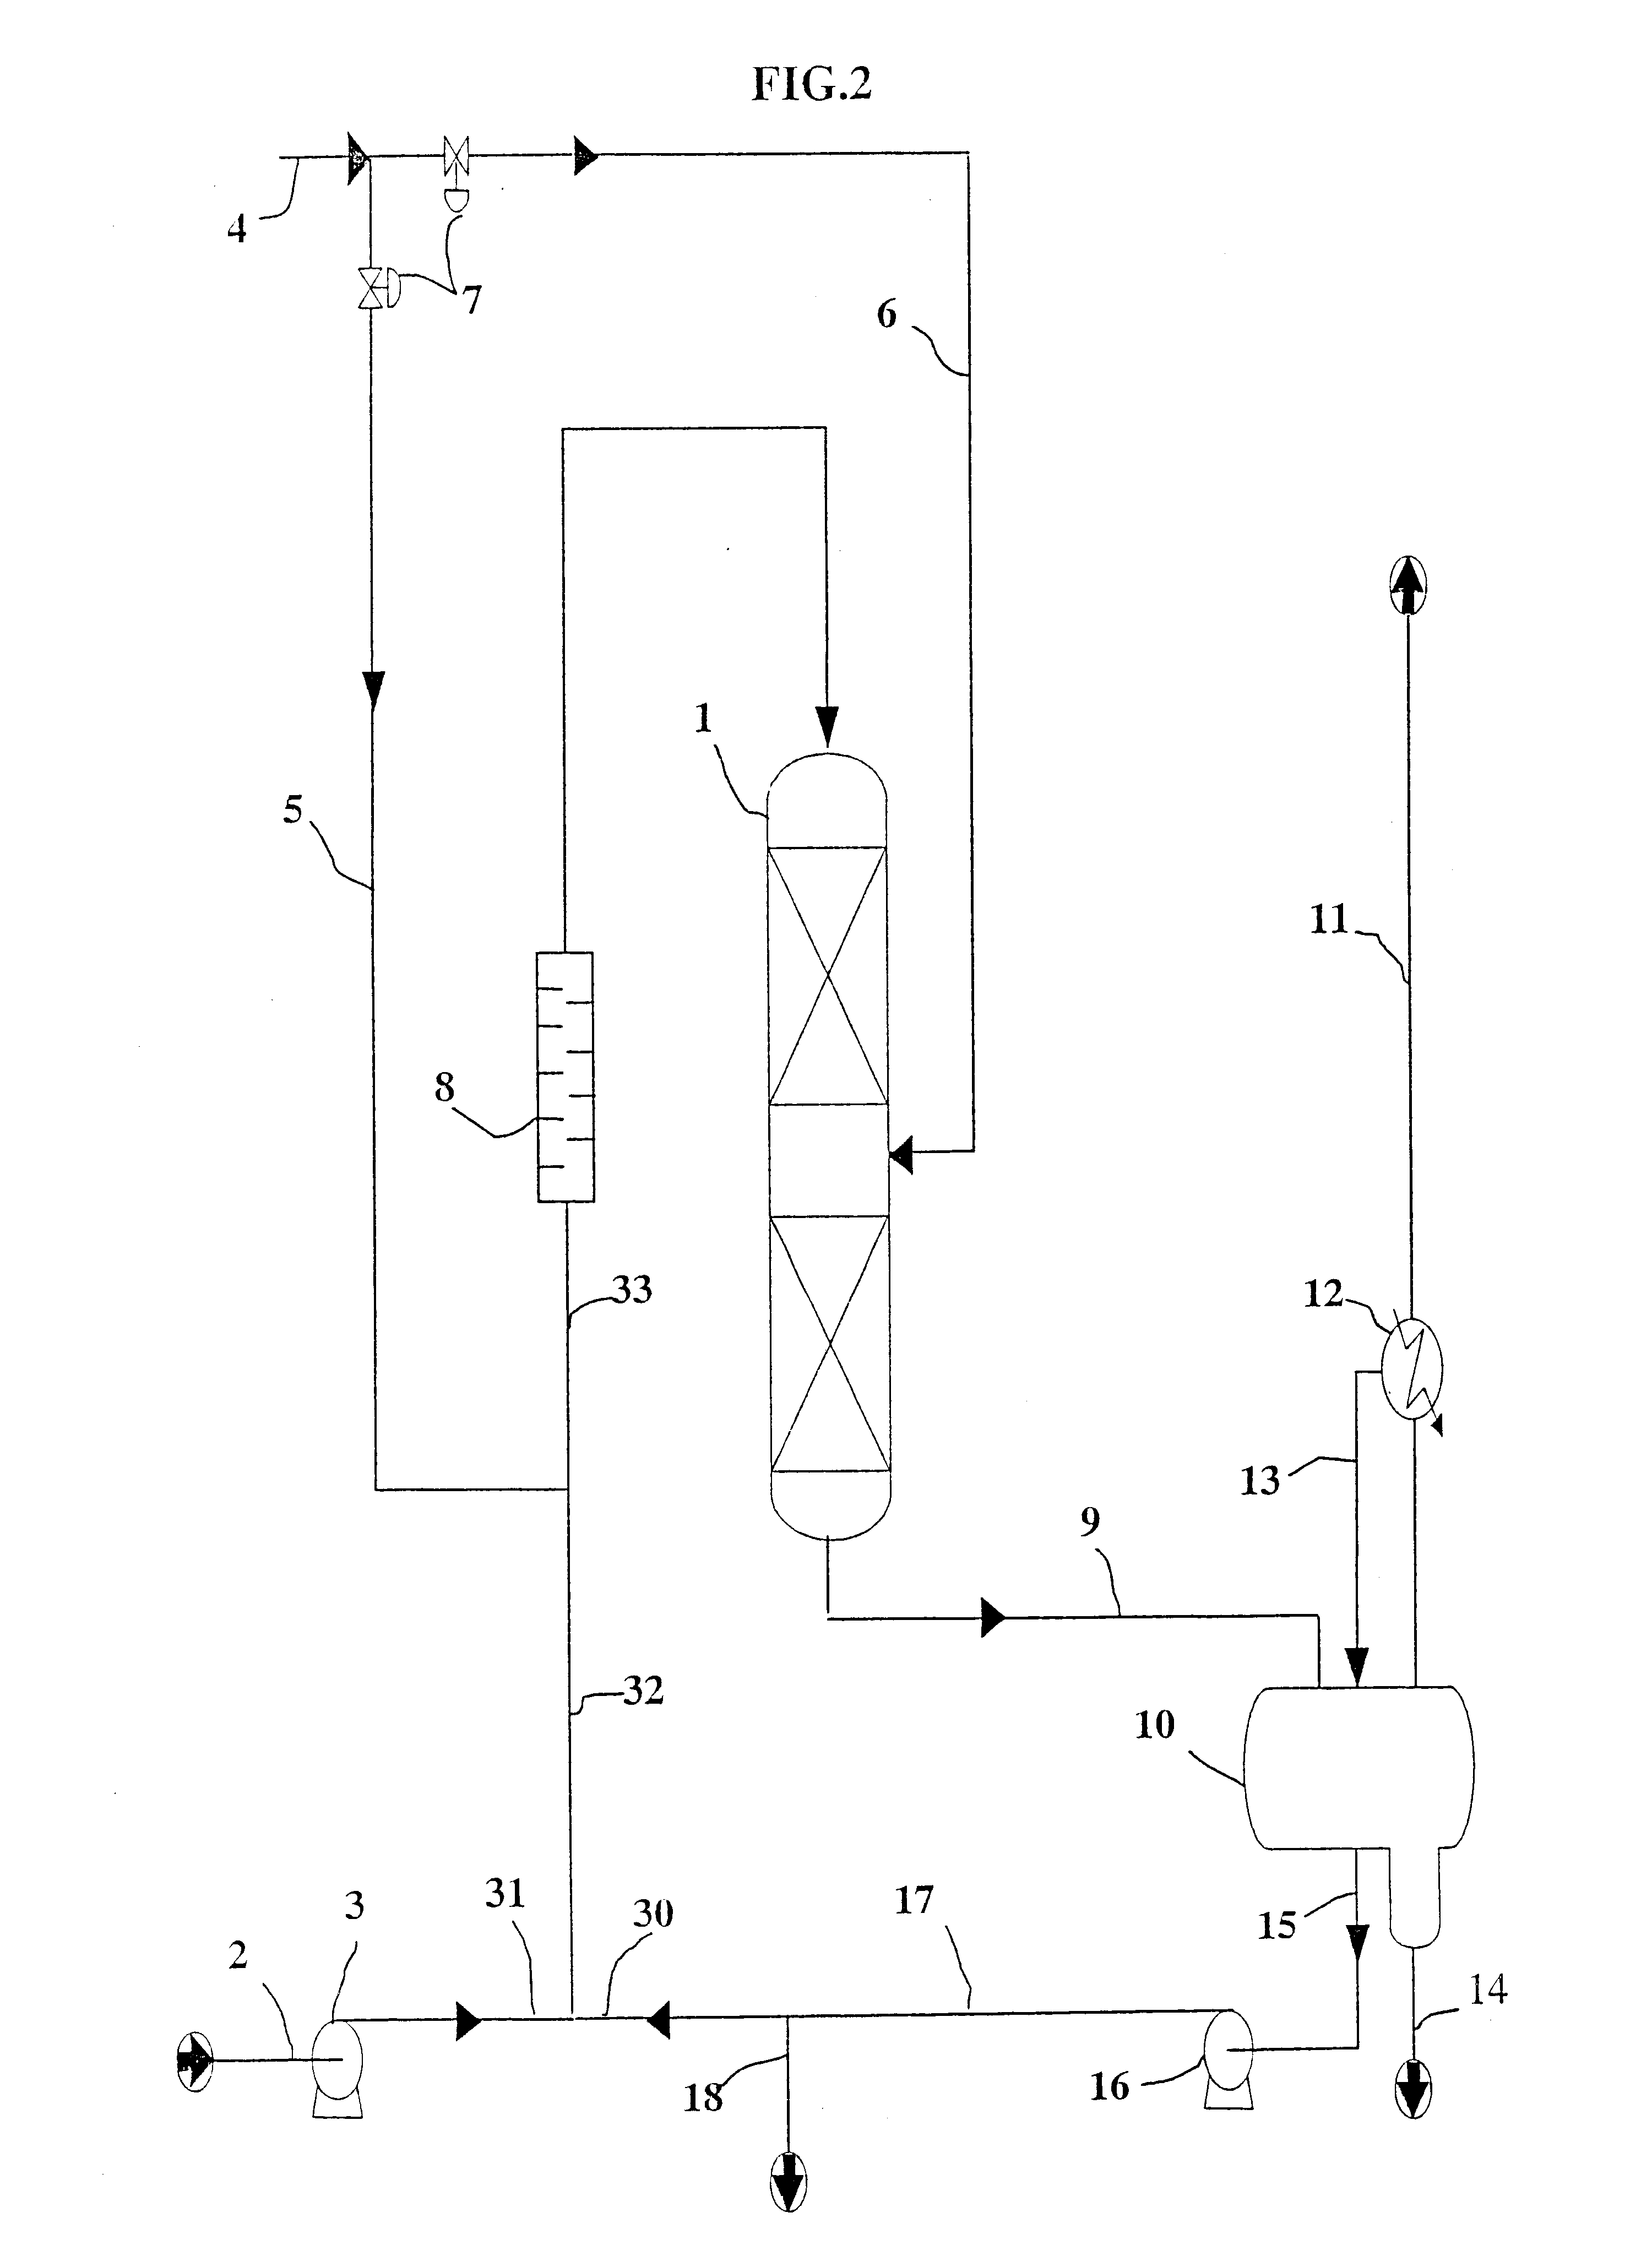 Process for hydrogenating cuts containing hydrocarbons, in particular unsaturated molecules containing at least two double bonds or at least one triple bond